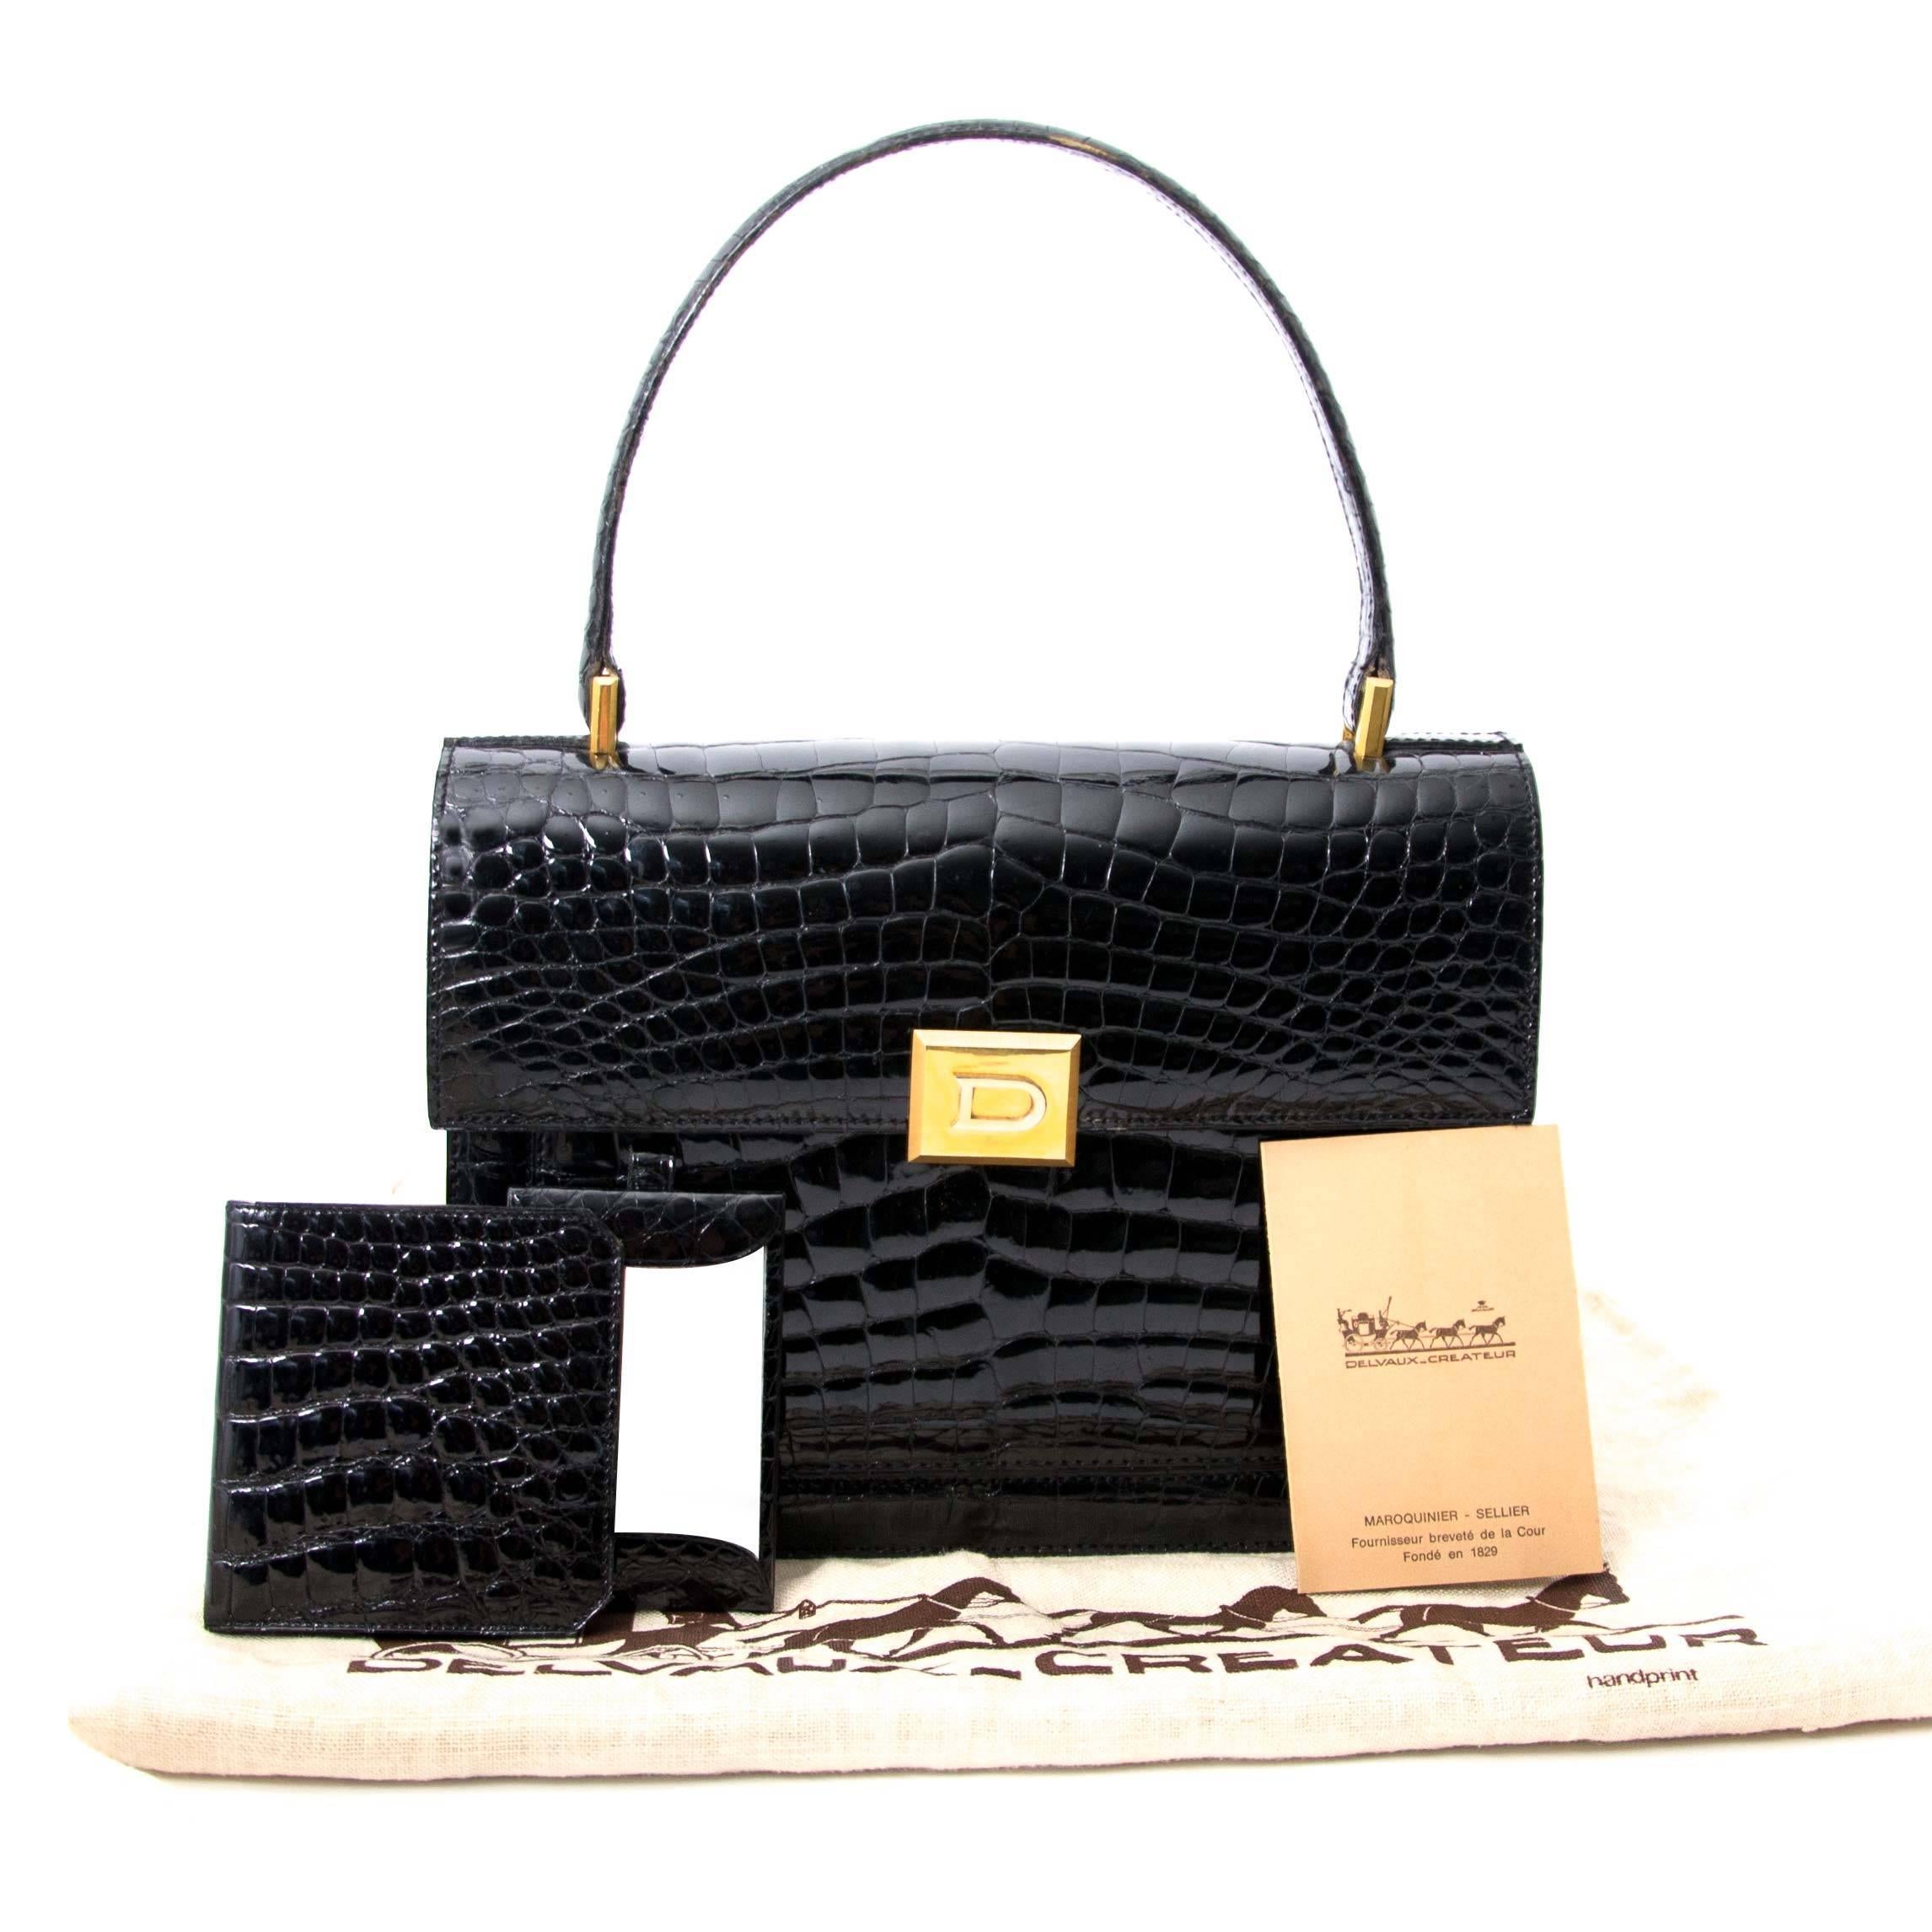 In good preloved condition.

Delvaux Black Croco Bag

Beautiful vintage Delvaux croco bag with gold-toned hardware.

The interior comes in camel suede and has a penholder, one side zip pocket and a phone pocket.

A timeless classic beauty.

Comes